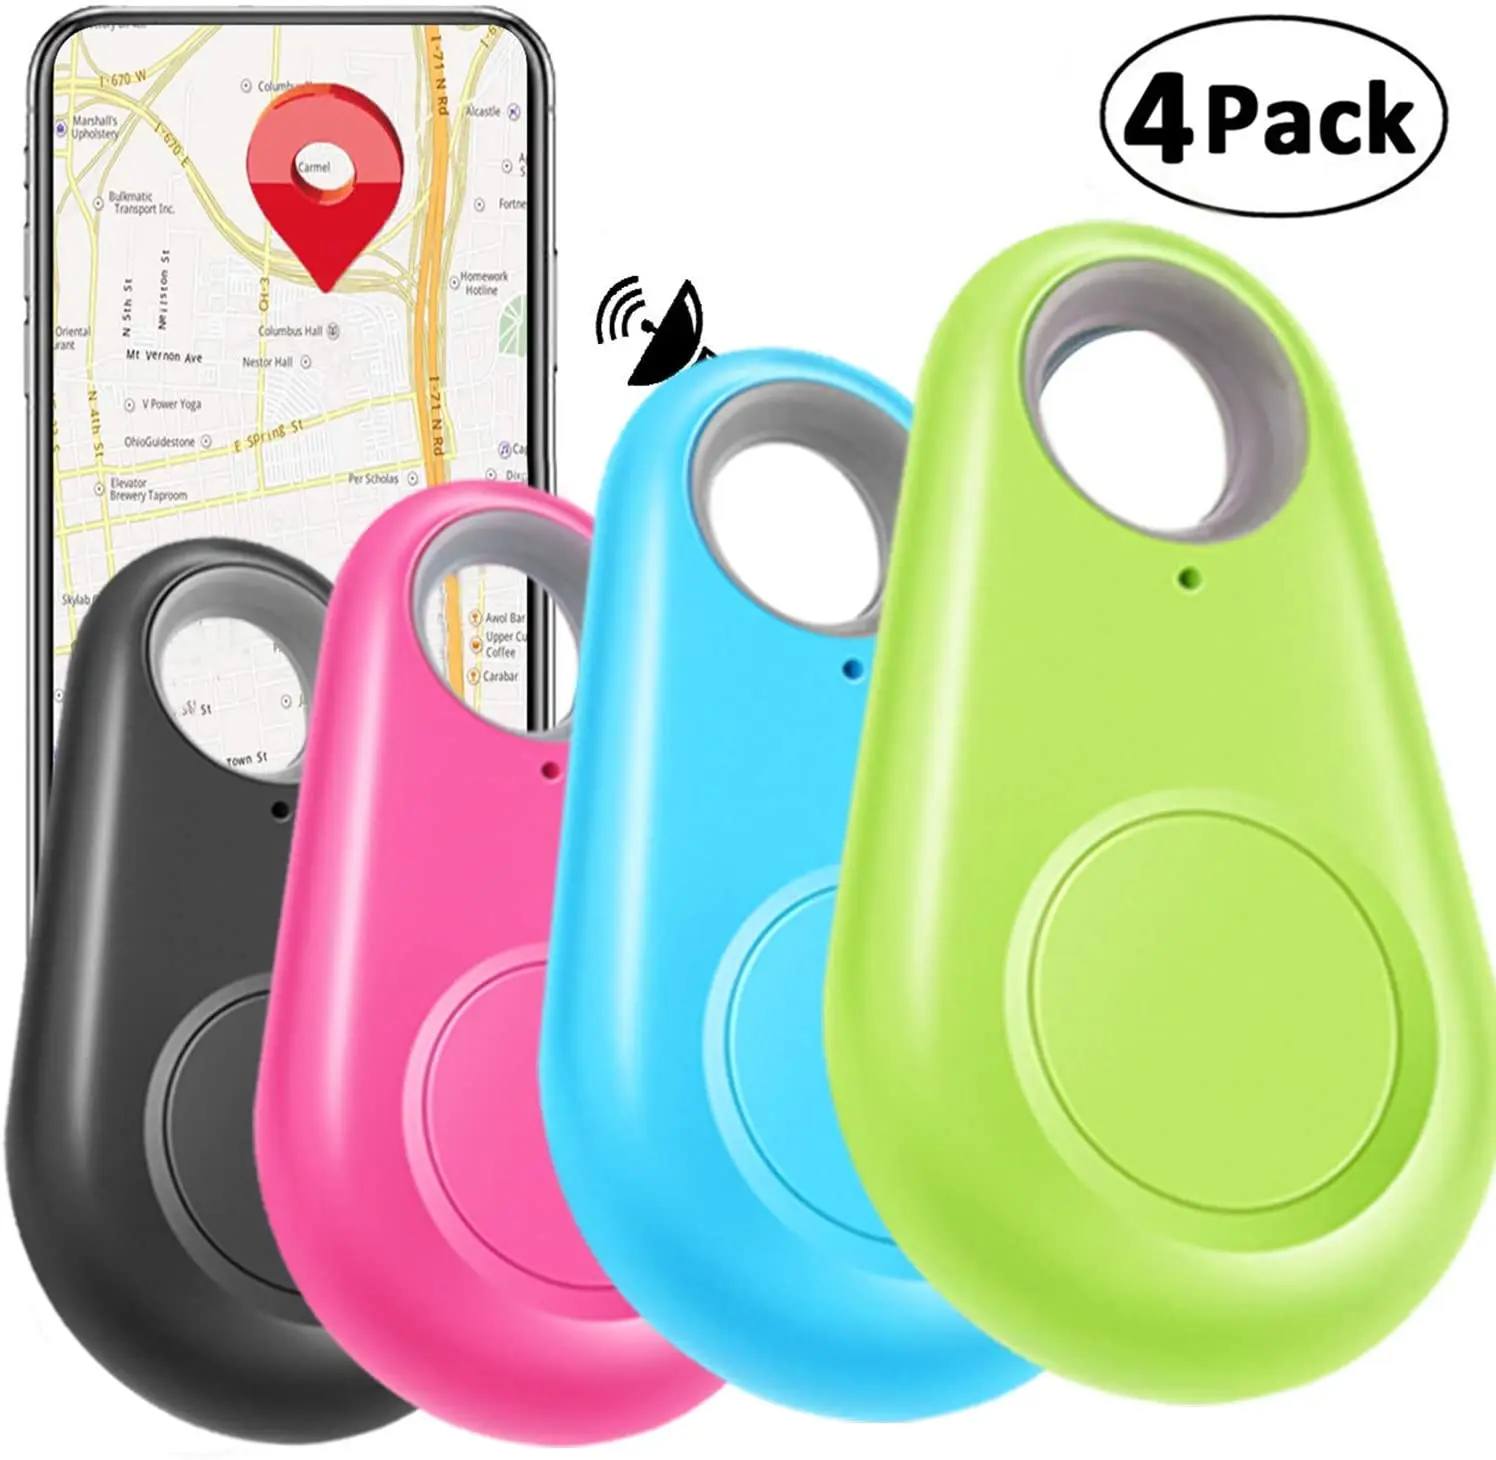 Smart Tracker Key Finder Locator Wireless Anti Lost Alarm Sensor Device for Kids Car Wallet Pets Luggage Phone Selfie Shutter Alarm Reminder APP Control Compatible iOS Android J 